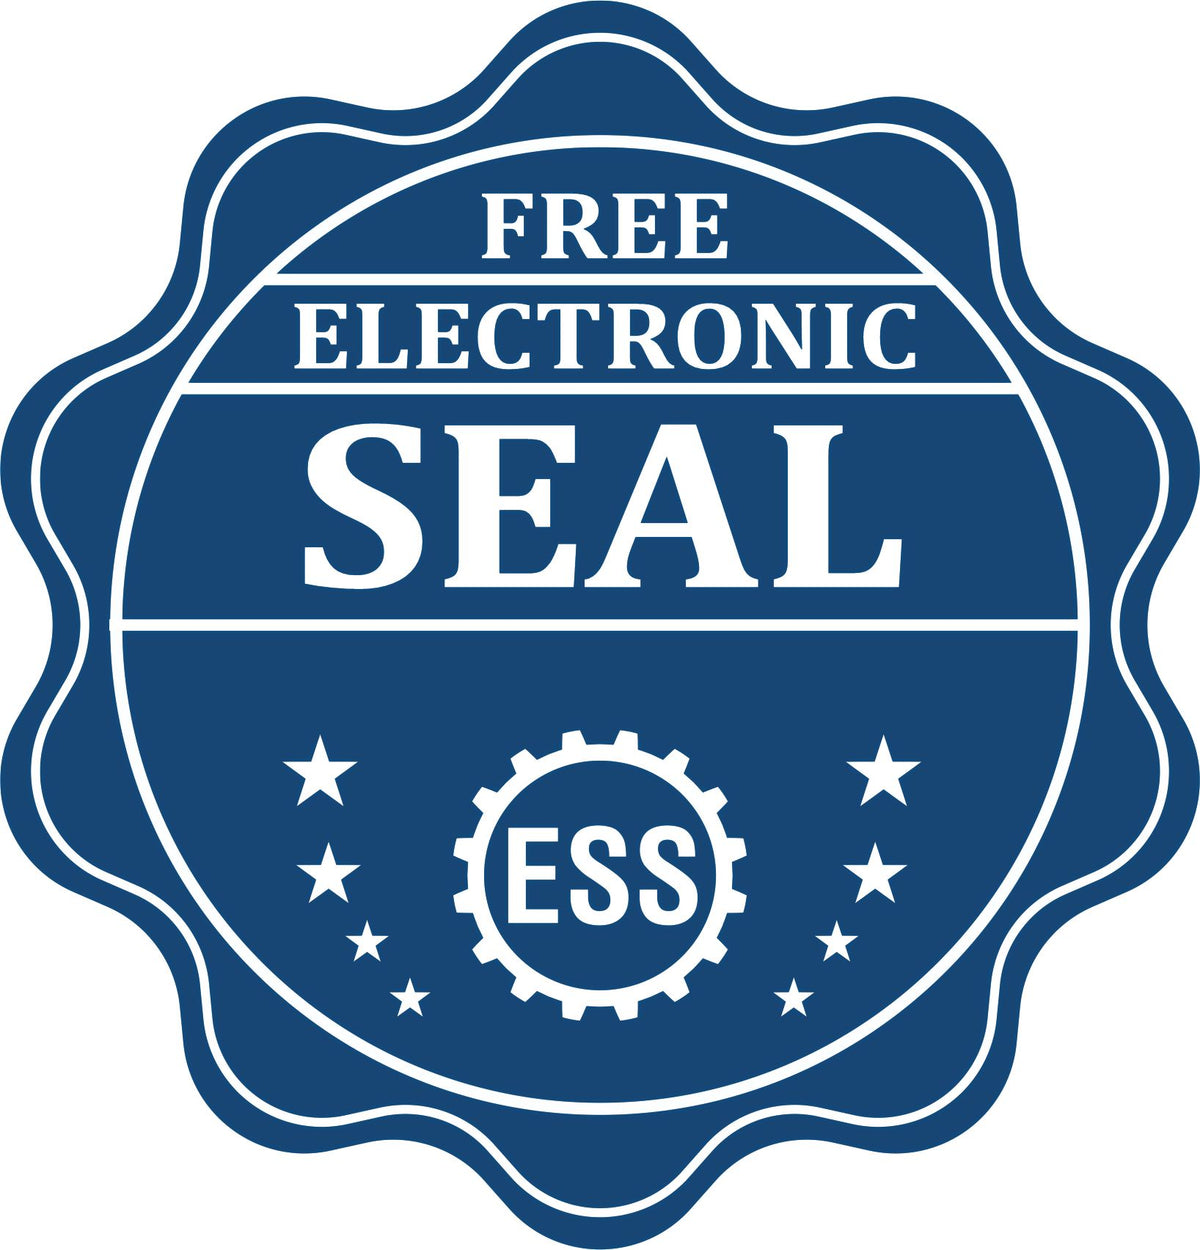 A badge showing a free electronic seal for the Gift Massachusetts Landscape Architect Seal with stars and the ESS gear on the emblem.